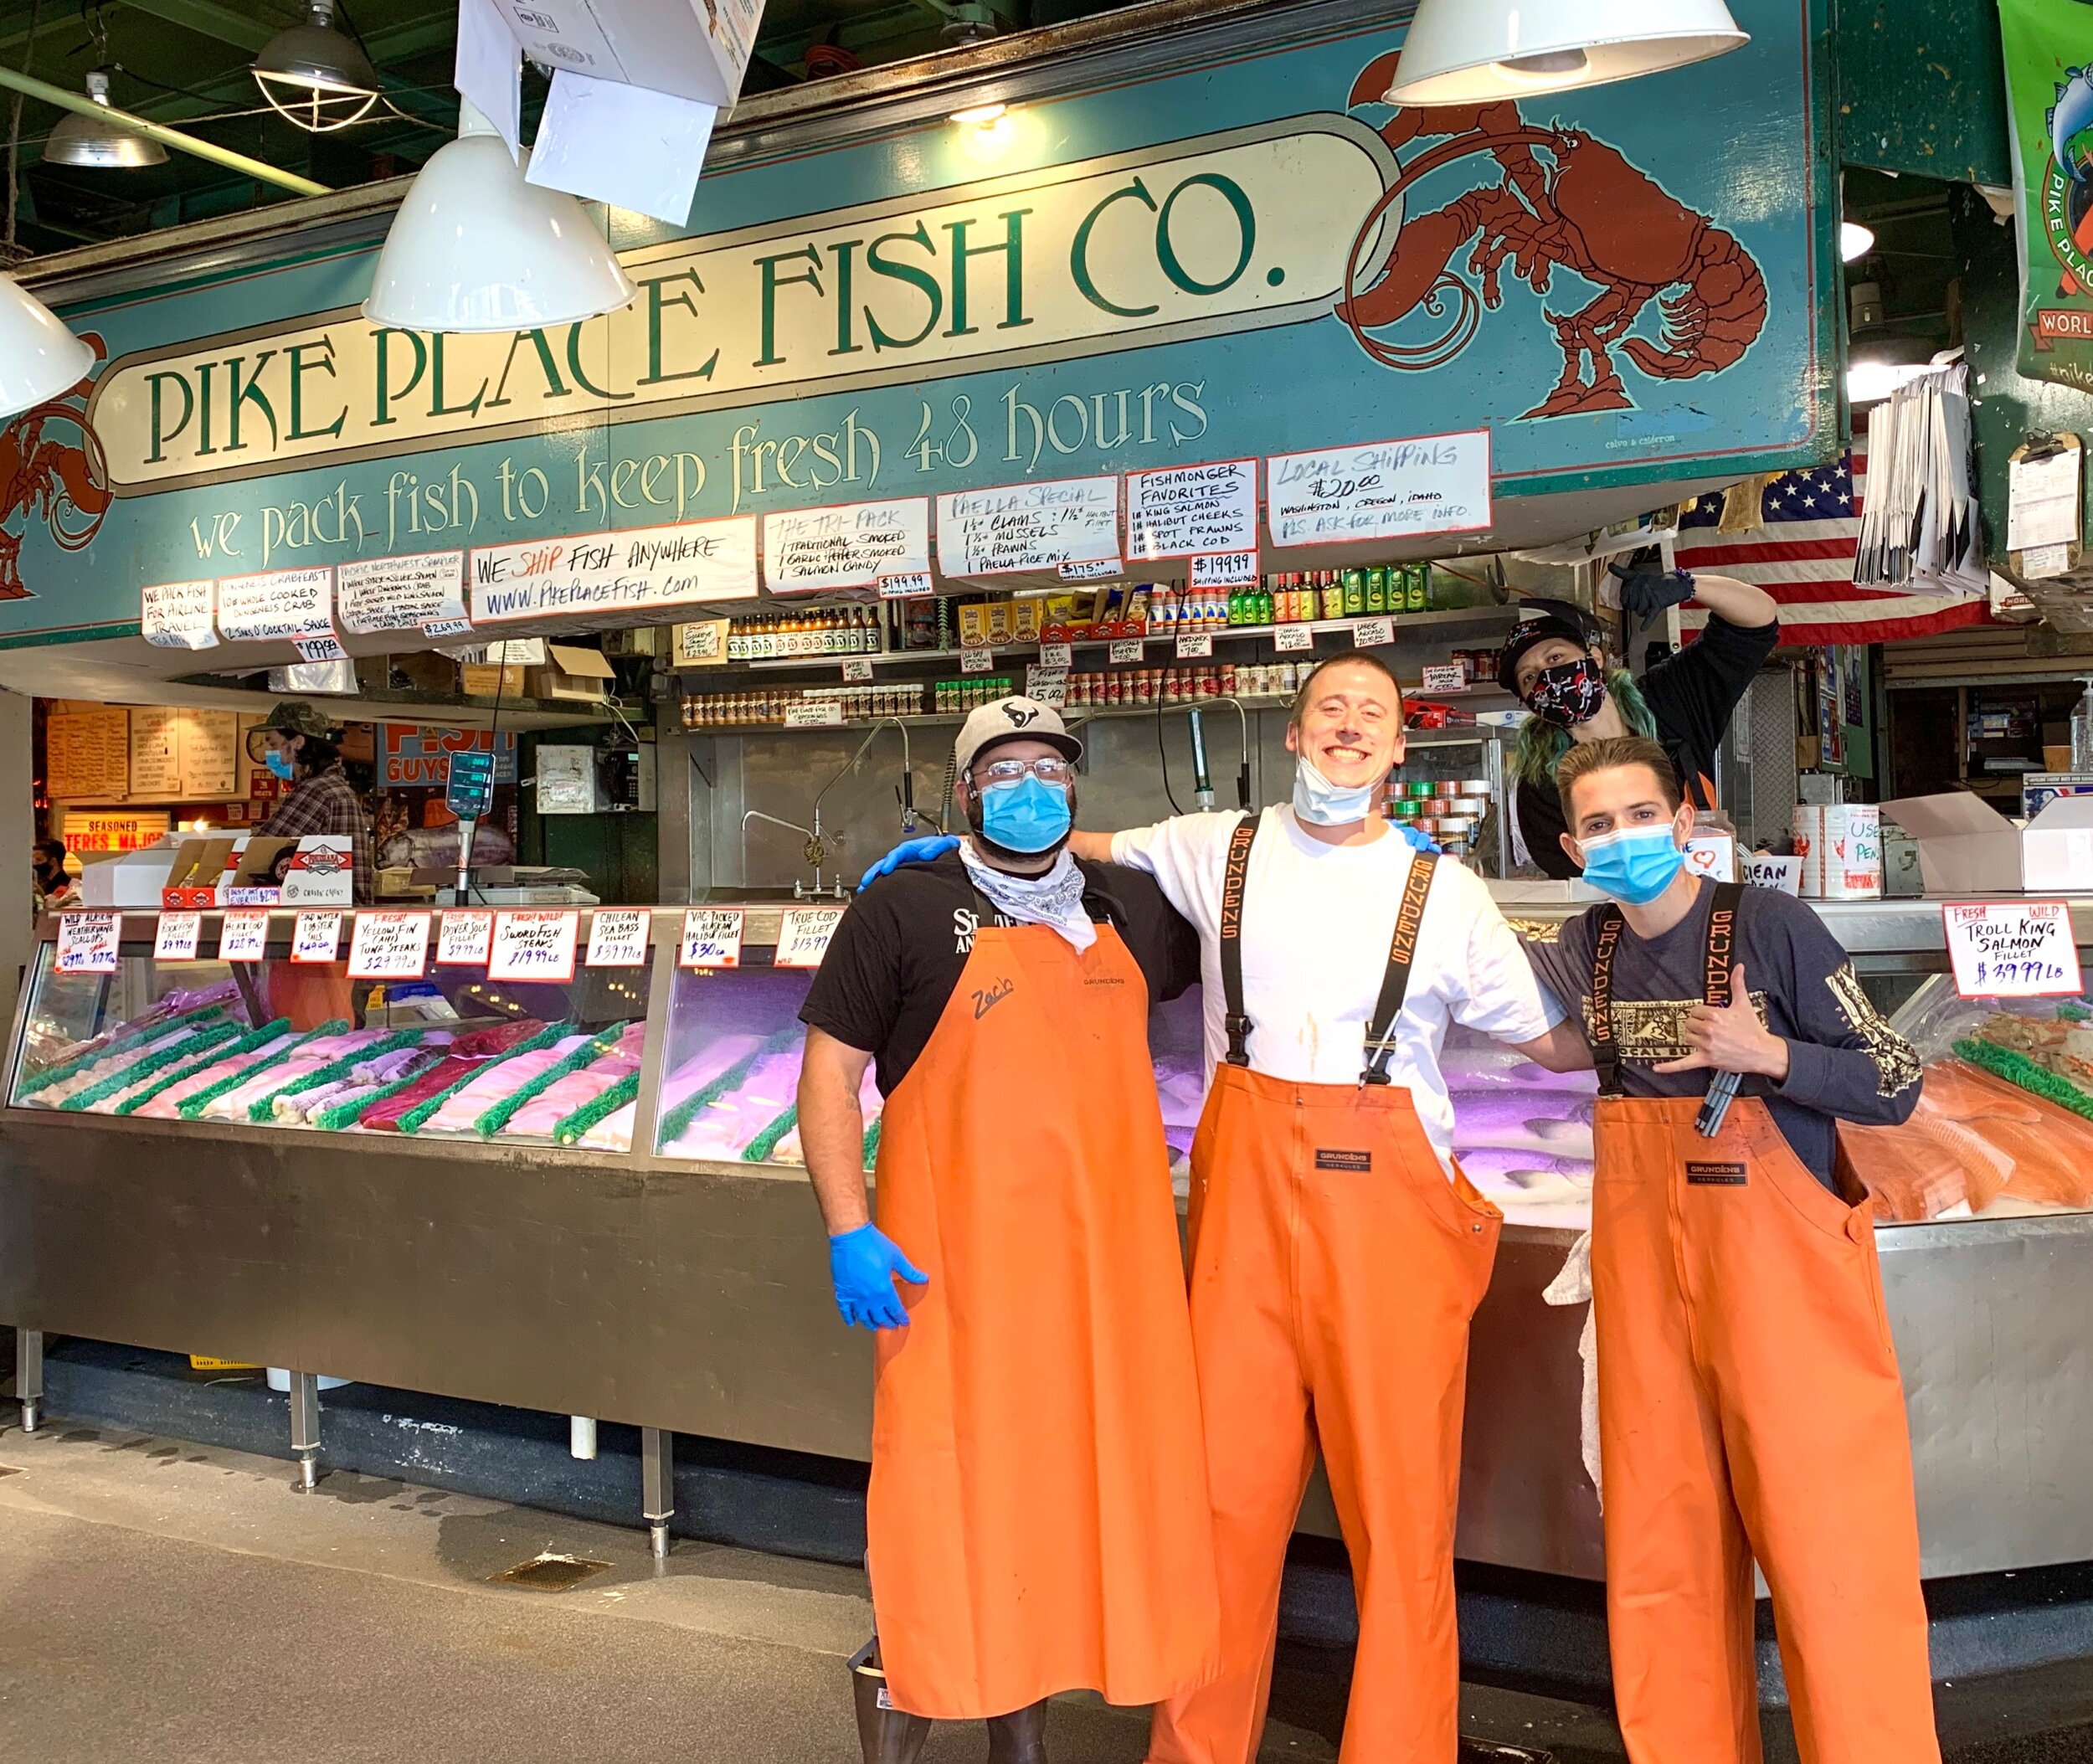  The famous Pike Place Fish Company almost went bankrupt in 1985 when they decided to take a stand to deliver "World Famous" customer service. The new "loving" mindset and philosophy turned the company around. Now, just for fun, the happy workers tos